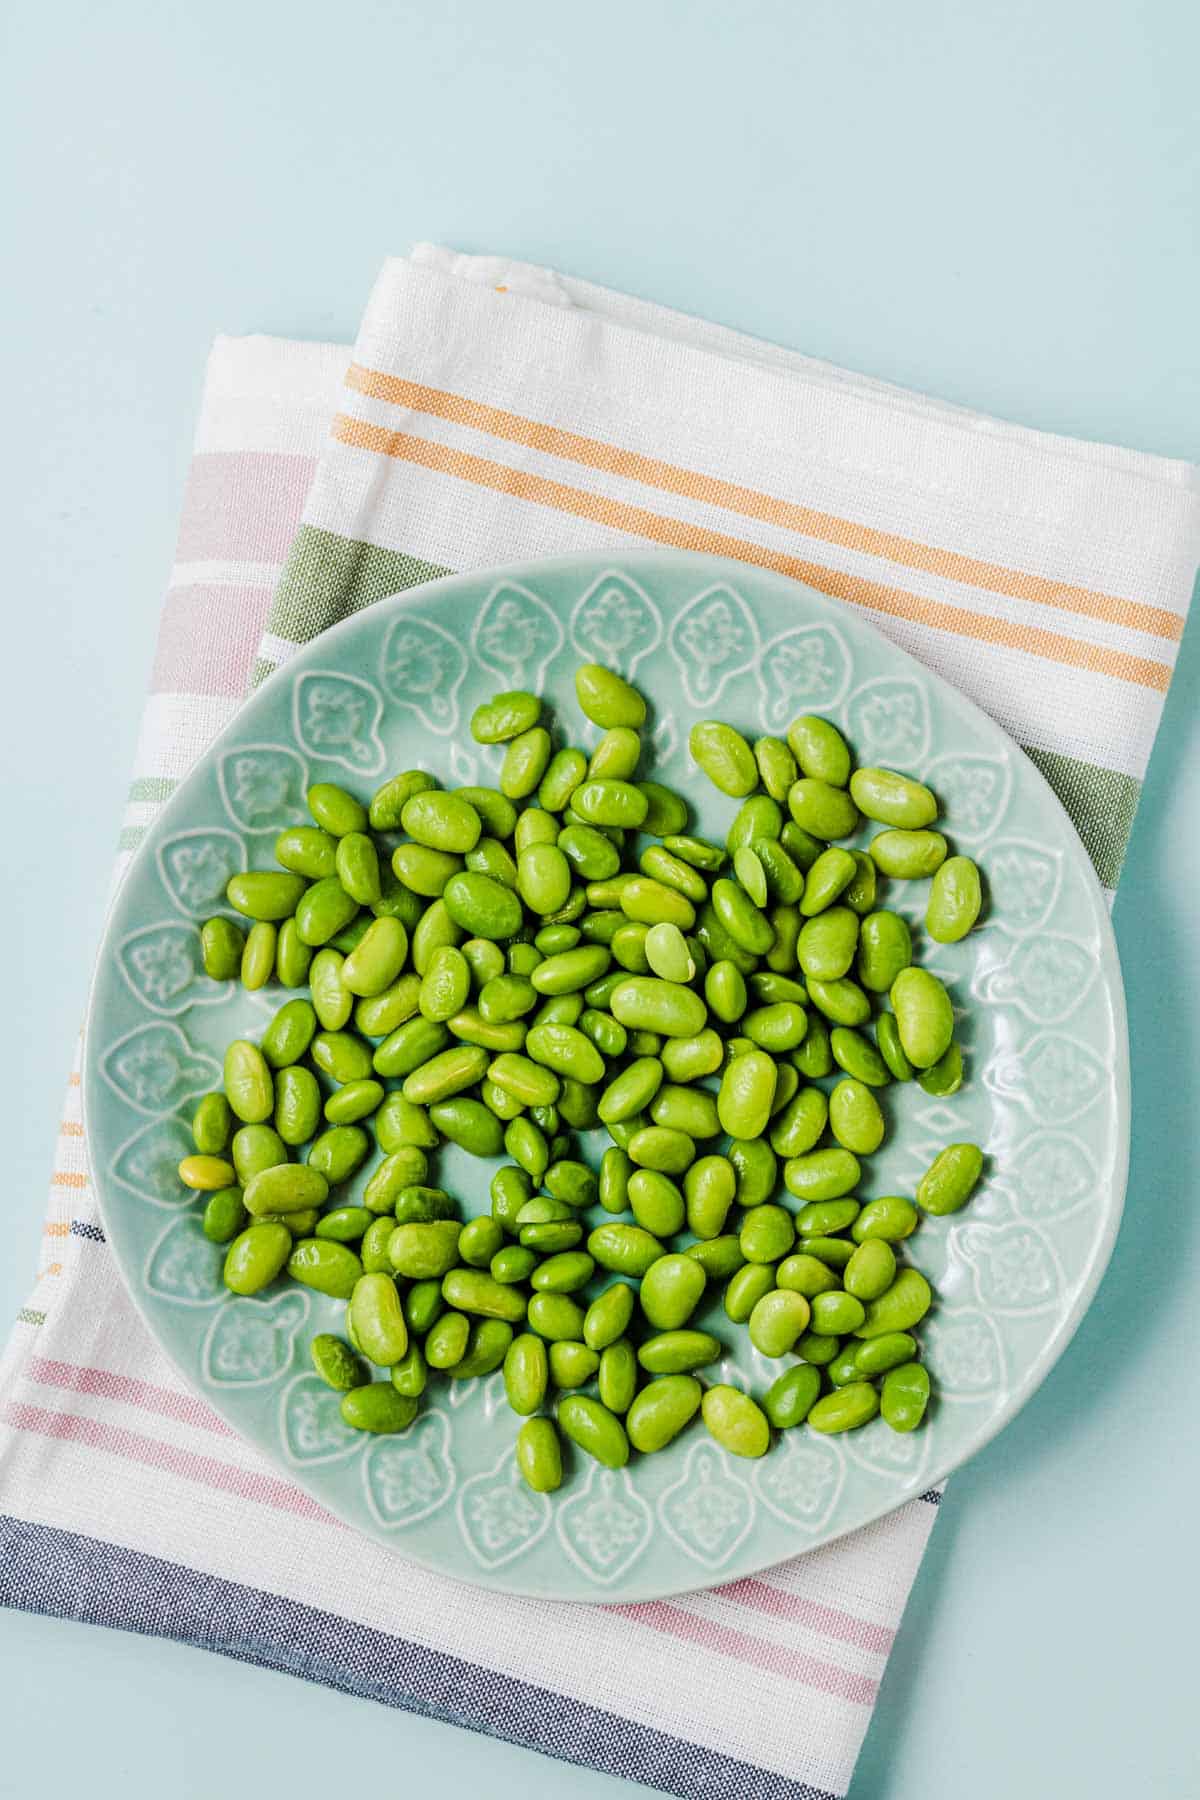 Birds eye view of edamame on a blue plate.